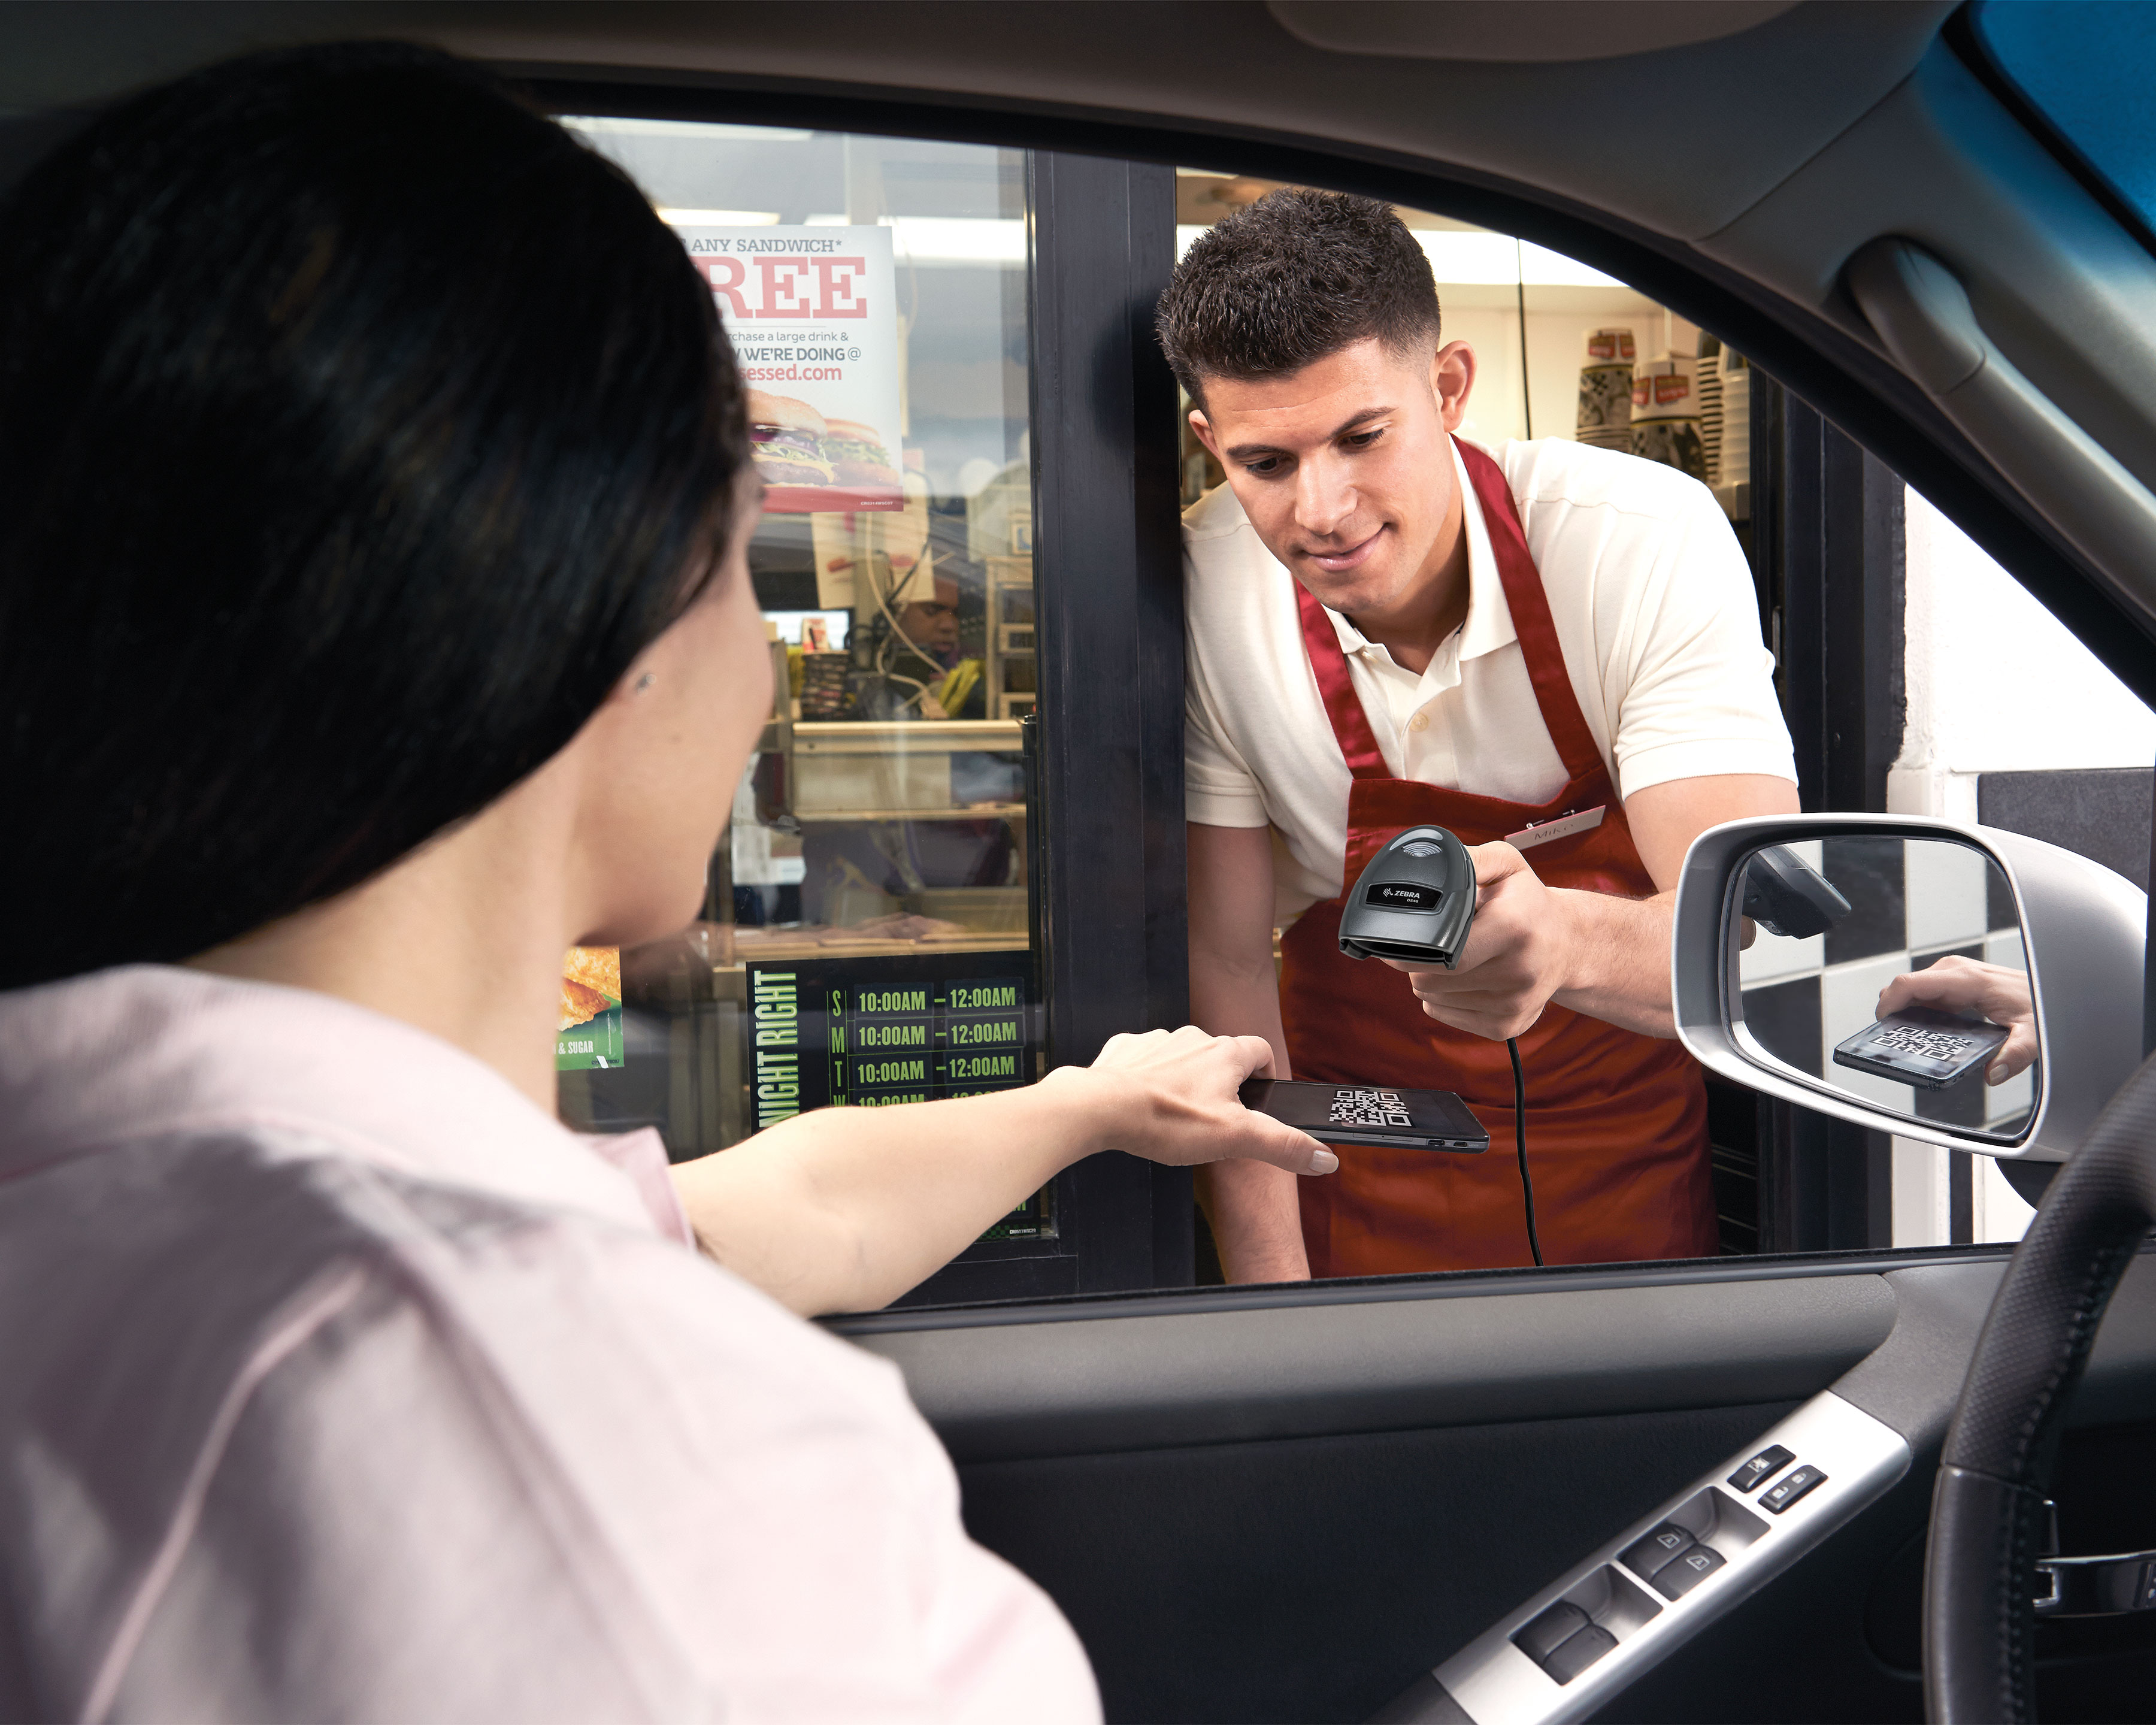 Fast food worker uses the Zebra DS4600 retail handheld scanner to scan a QR code displayed on a customer's mobile phone in a drive through